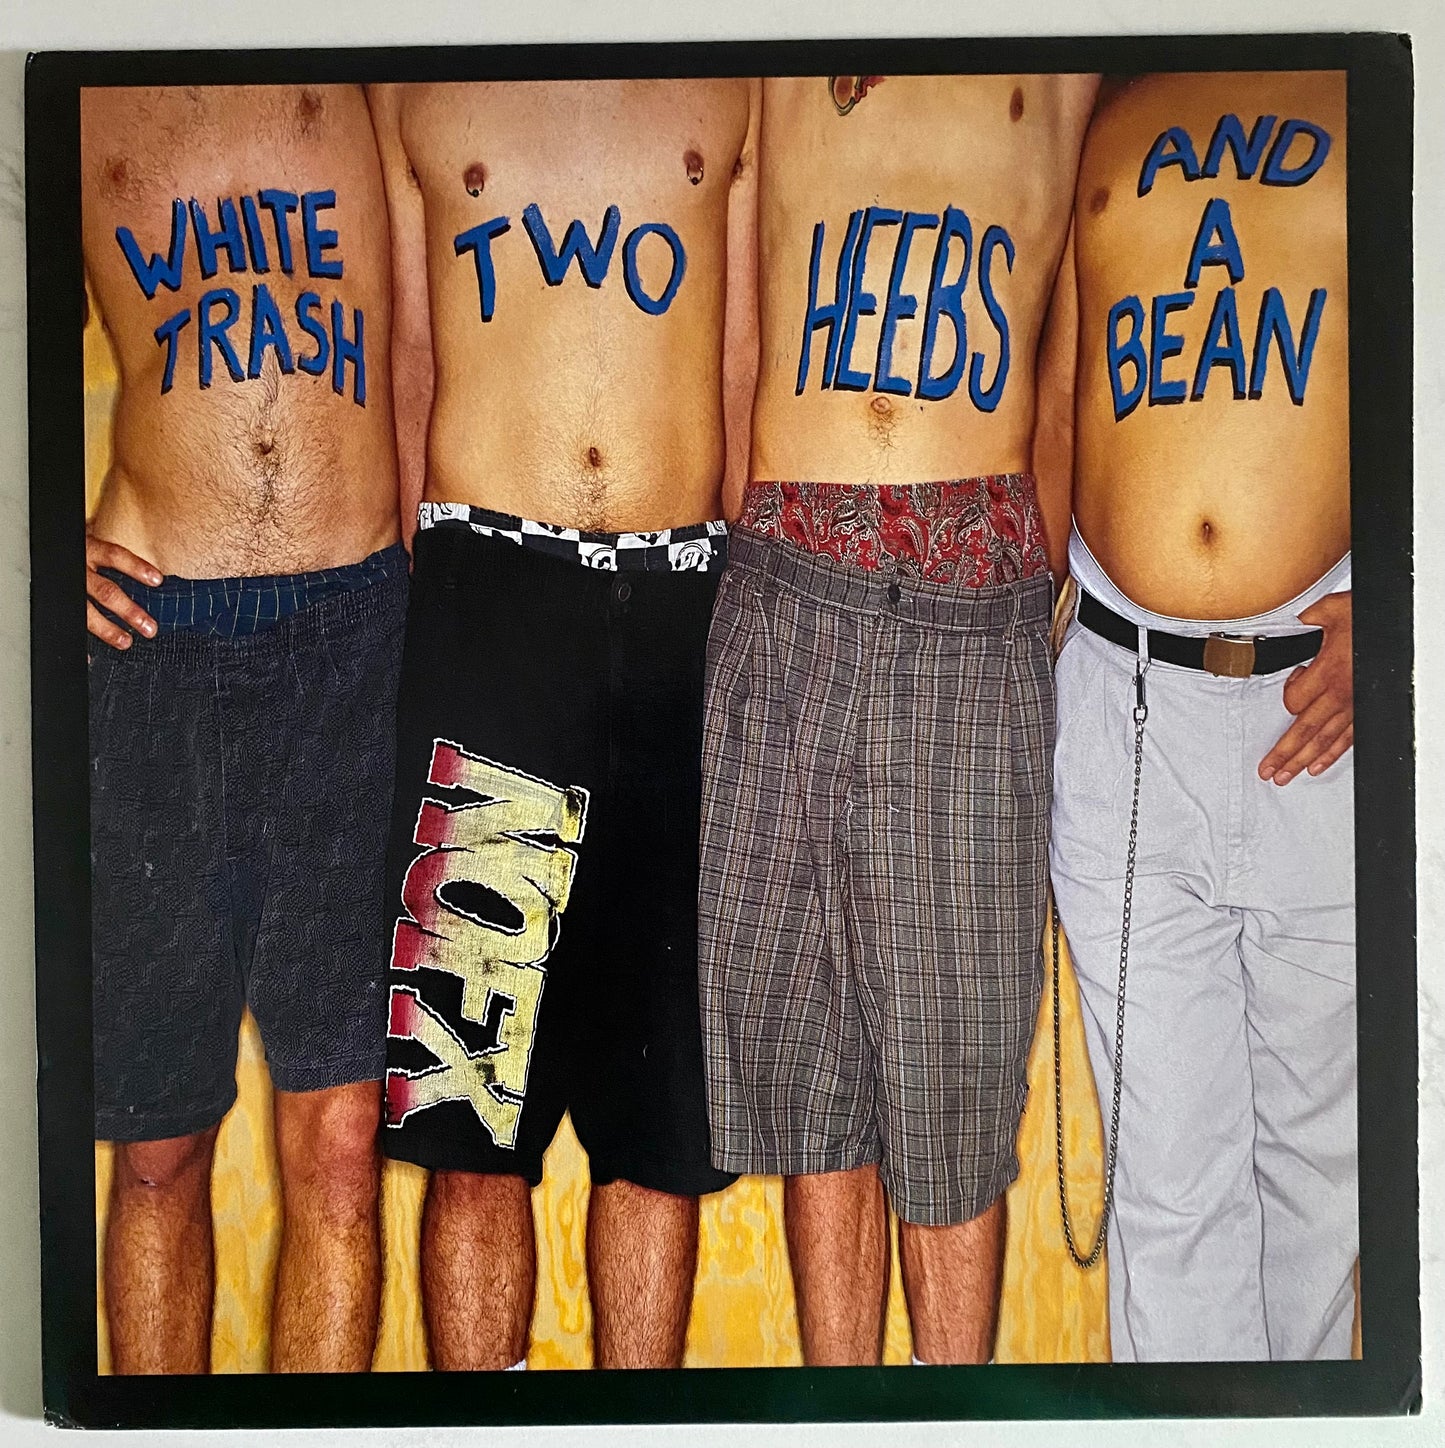 NOFX - White Trash, Two Heebs And A Bean (LP, Album). ROCK